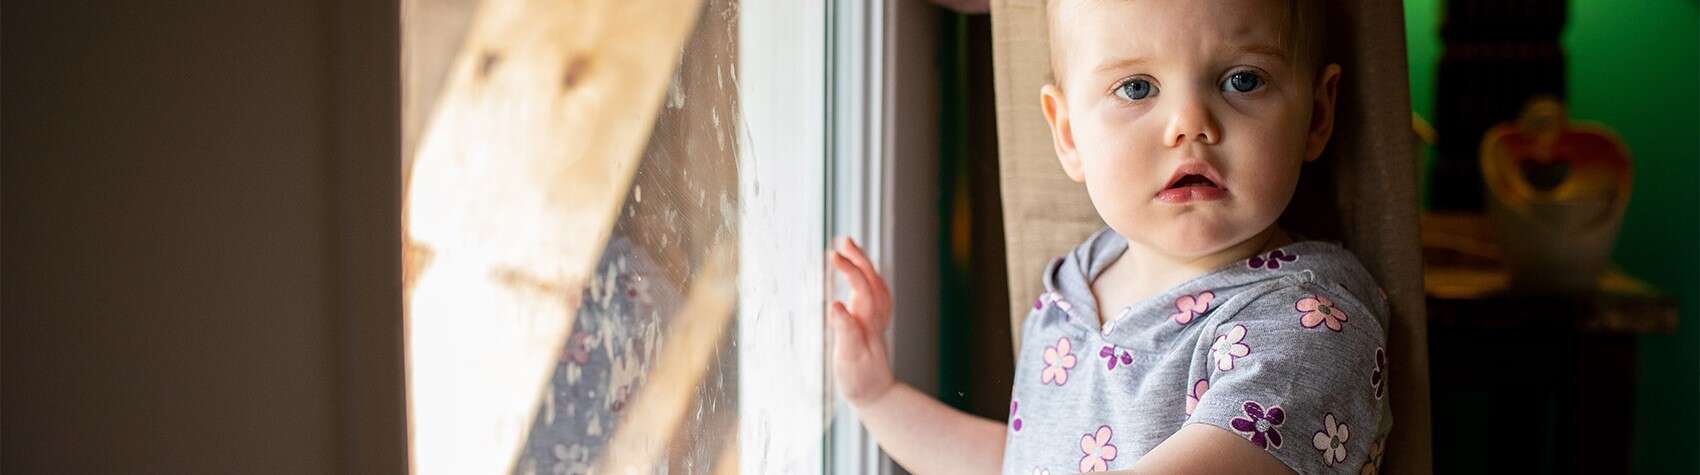 A toddler stands with her hand on a glass sliding door inside her home in West Virginia.